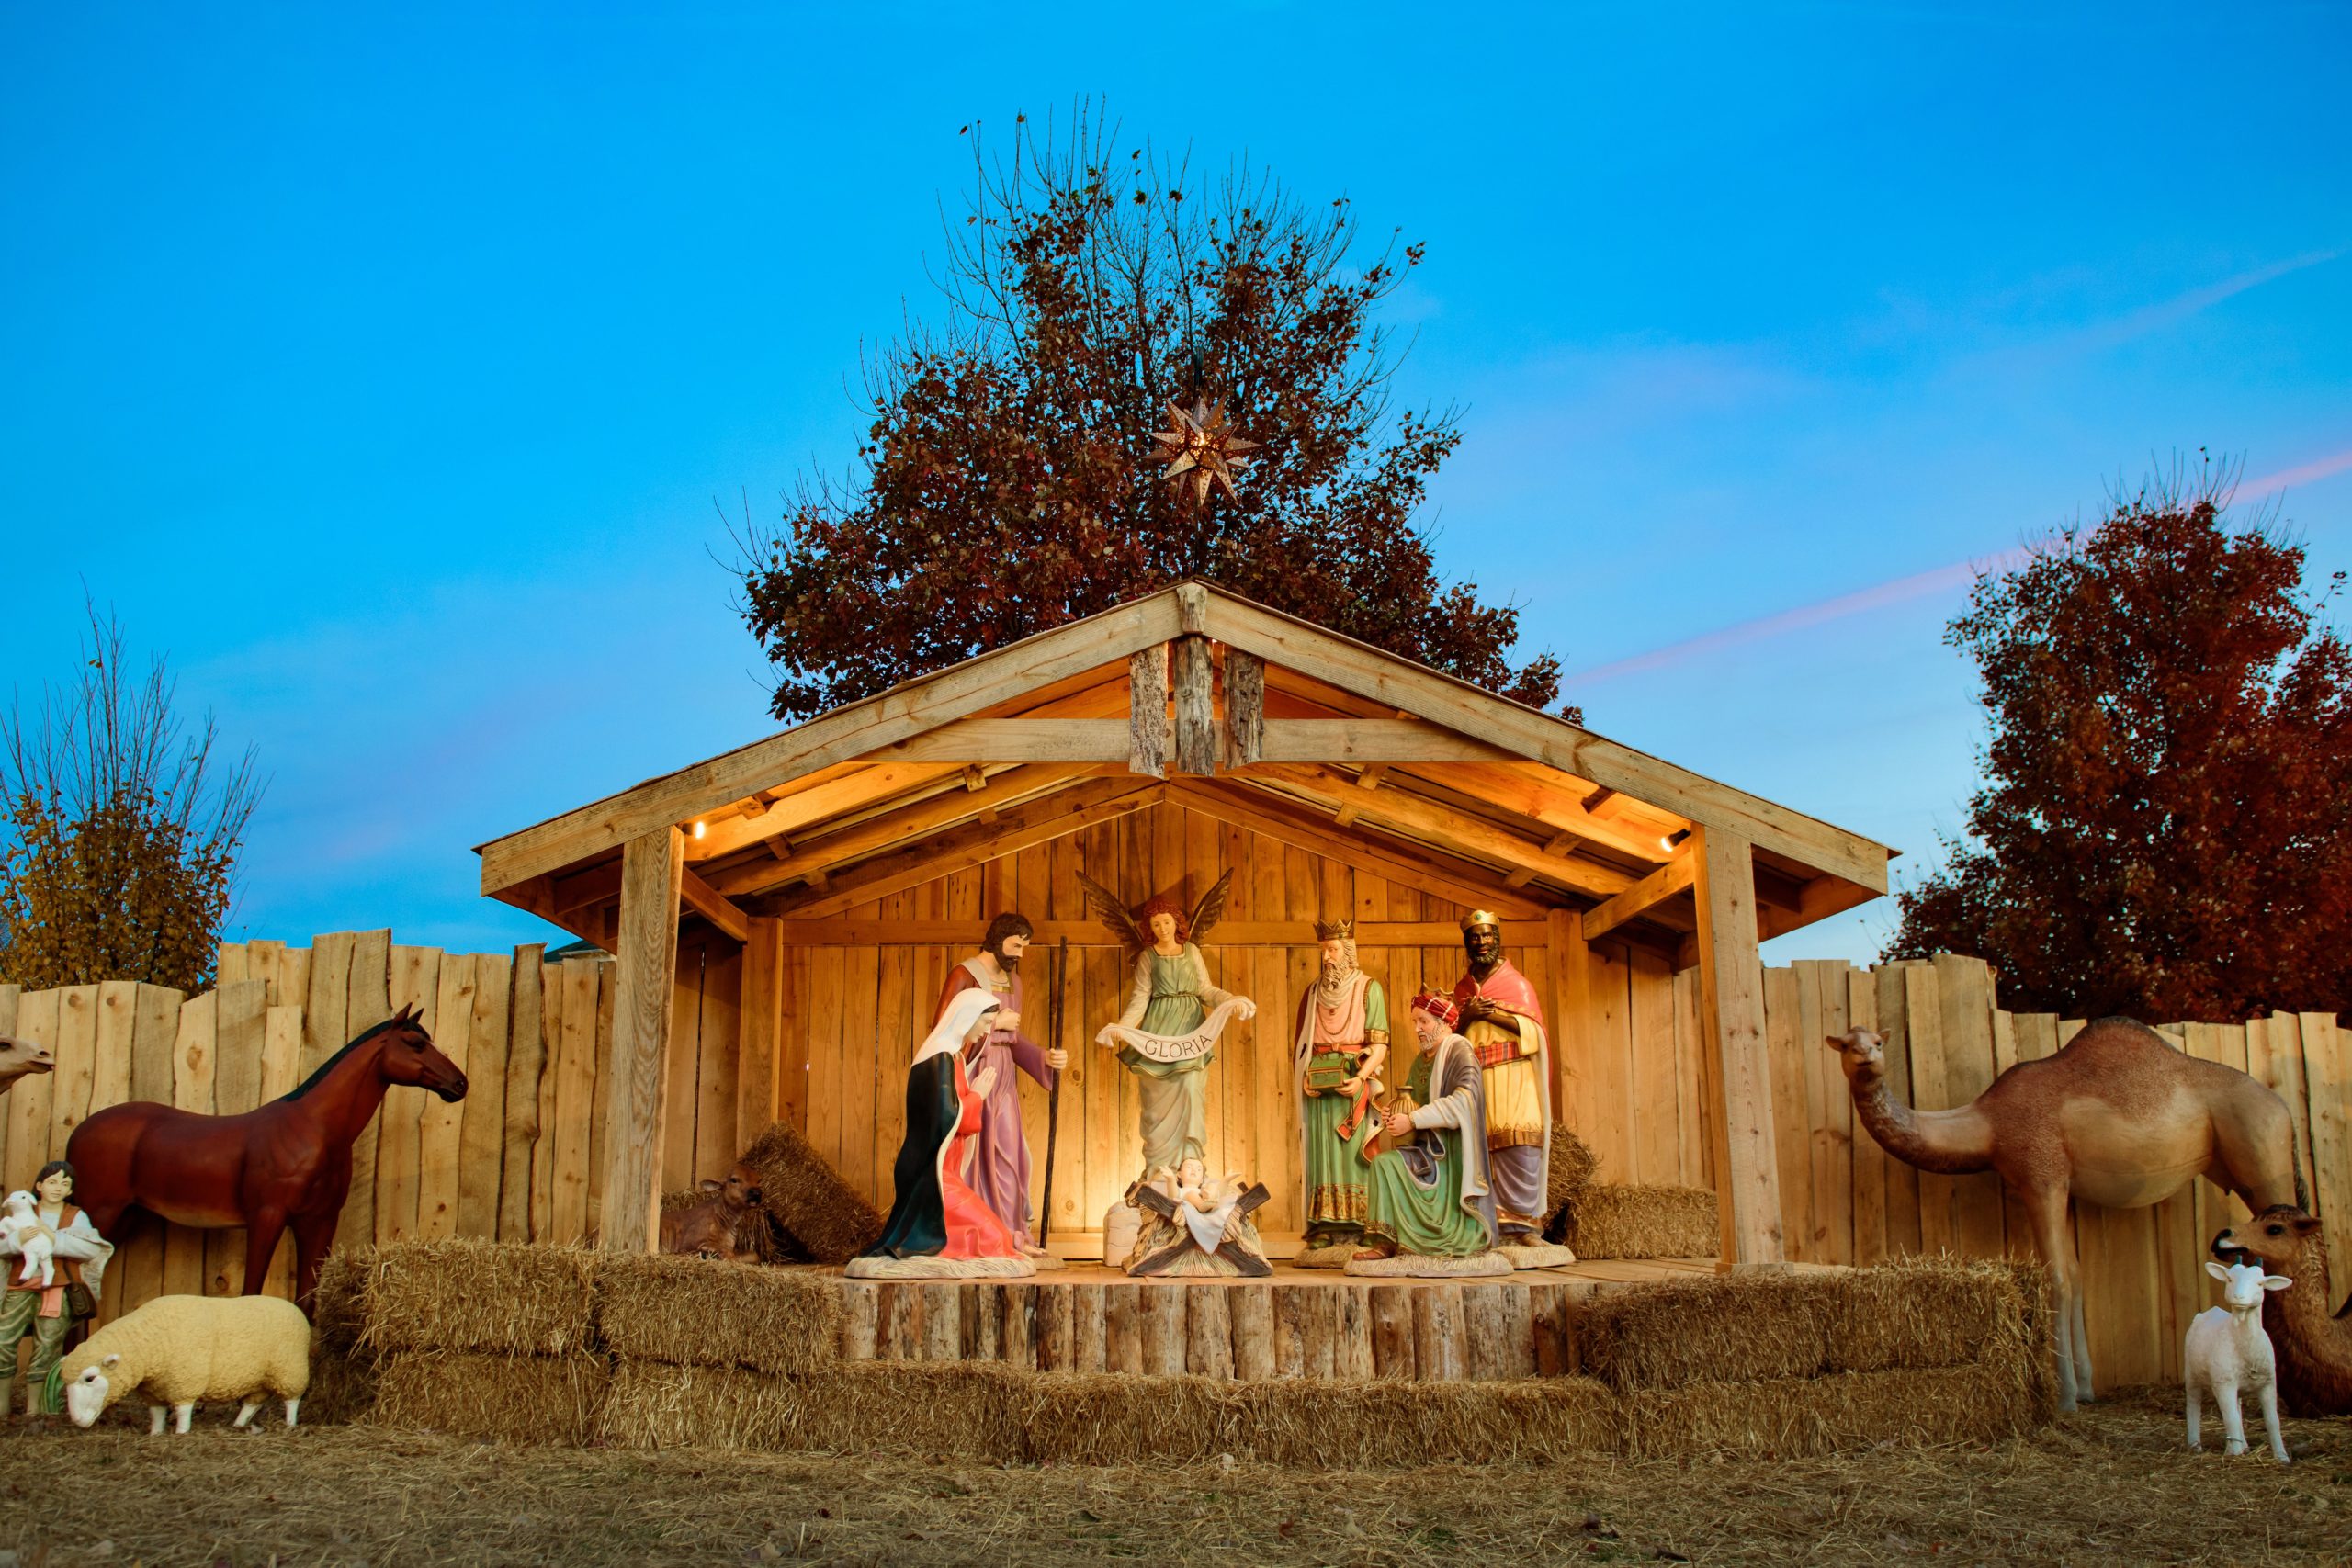 The nativity scene at High Point Unviersity features live-size pieces.